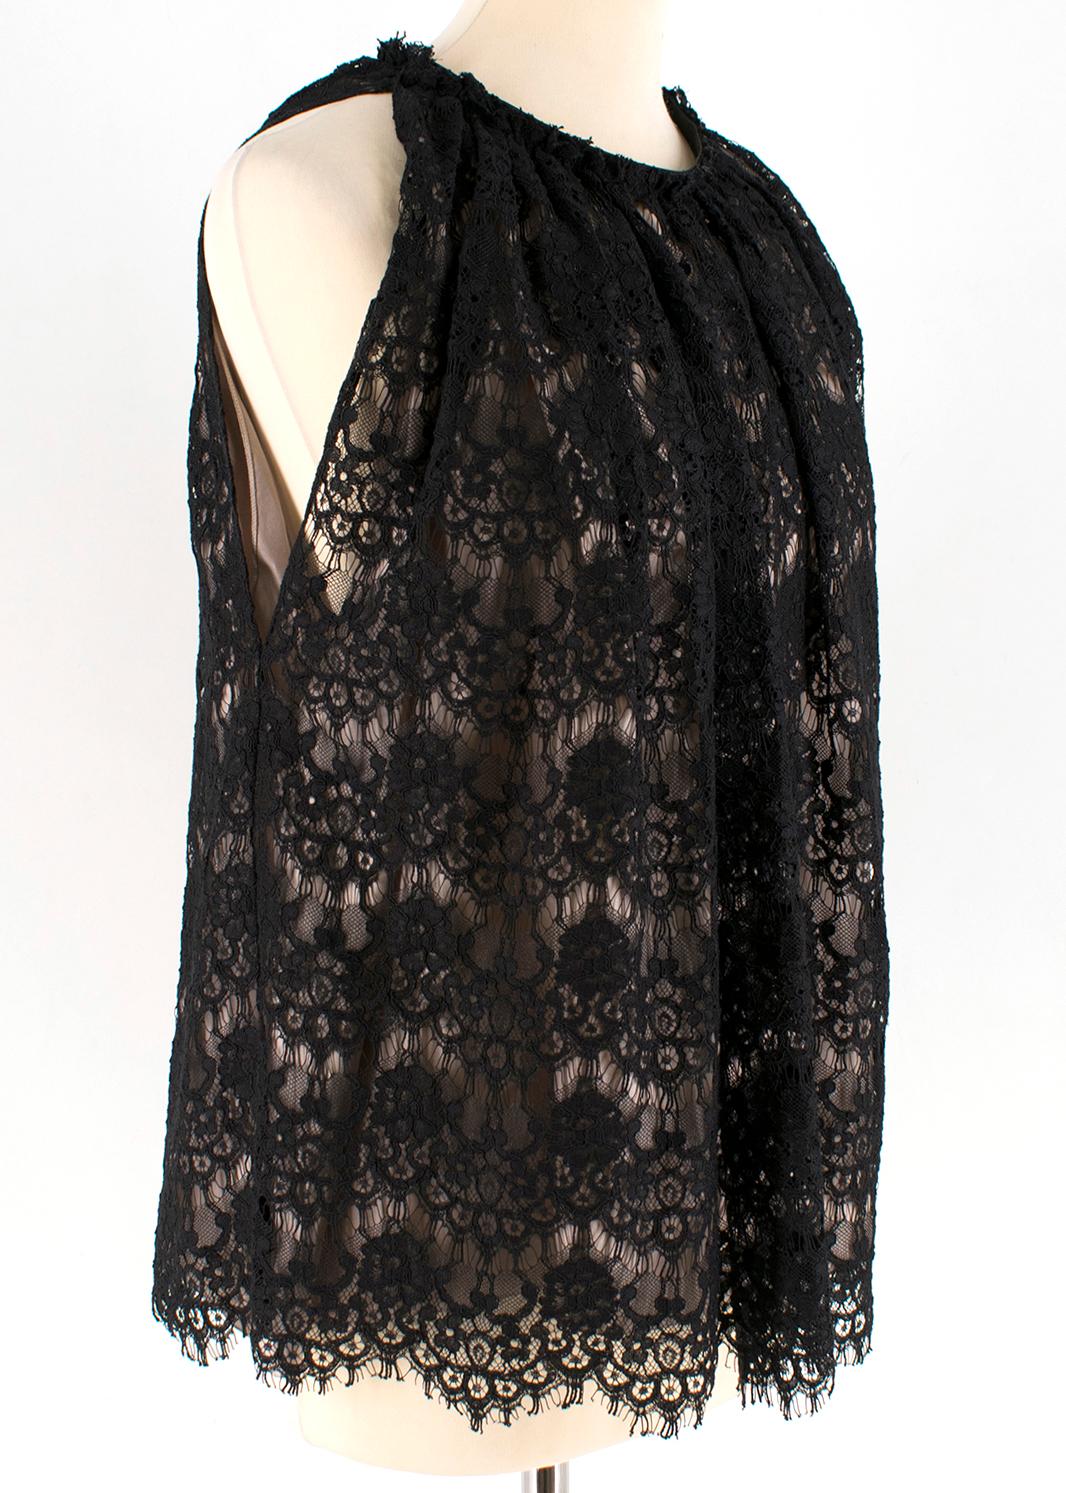 Lanvin Black Silk Lace Embellished Sleeveless Top

- layered black lace top 
- halterneck style 
- sleeveless
- silk lined
- hook fastening to the neck side

Please note, these items are pre-owned and may show some signs of storage, even when unworn